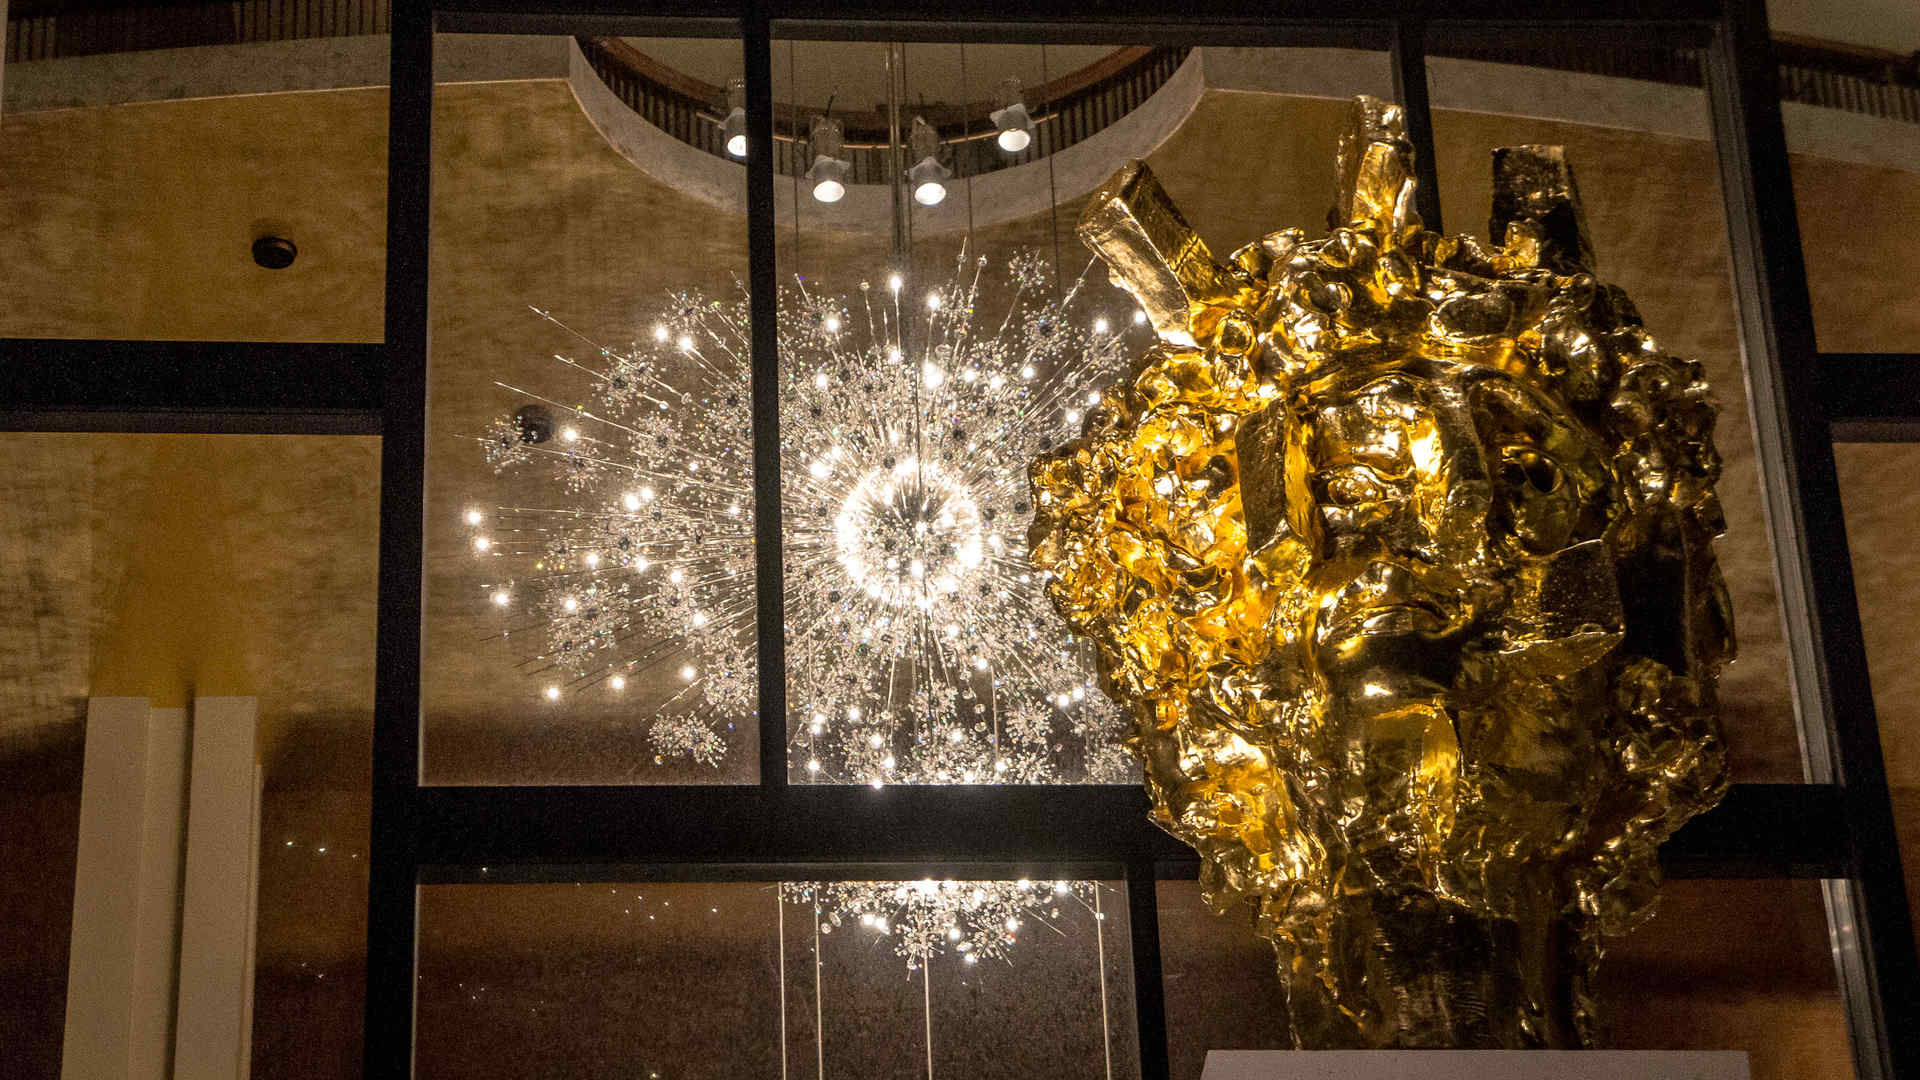 A chandelier at the Met Opera